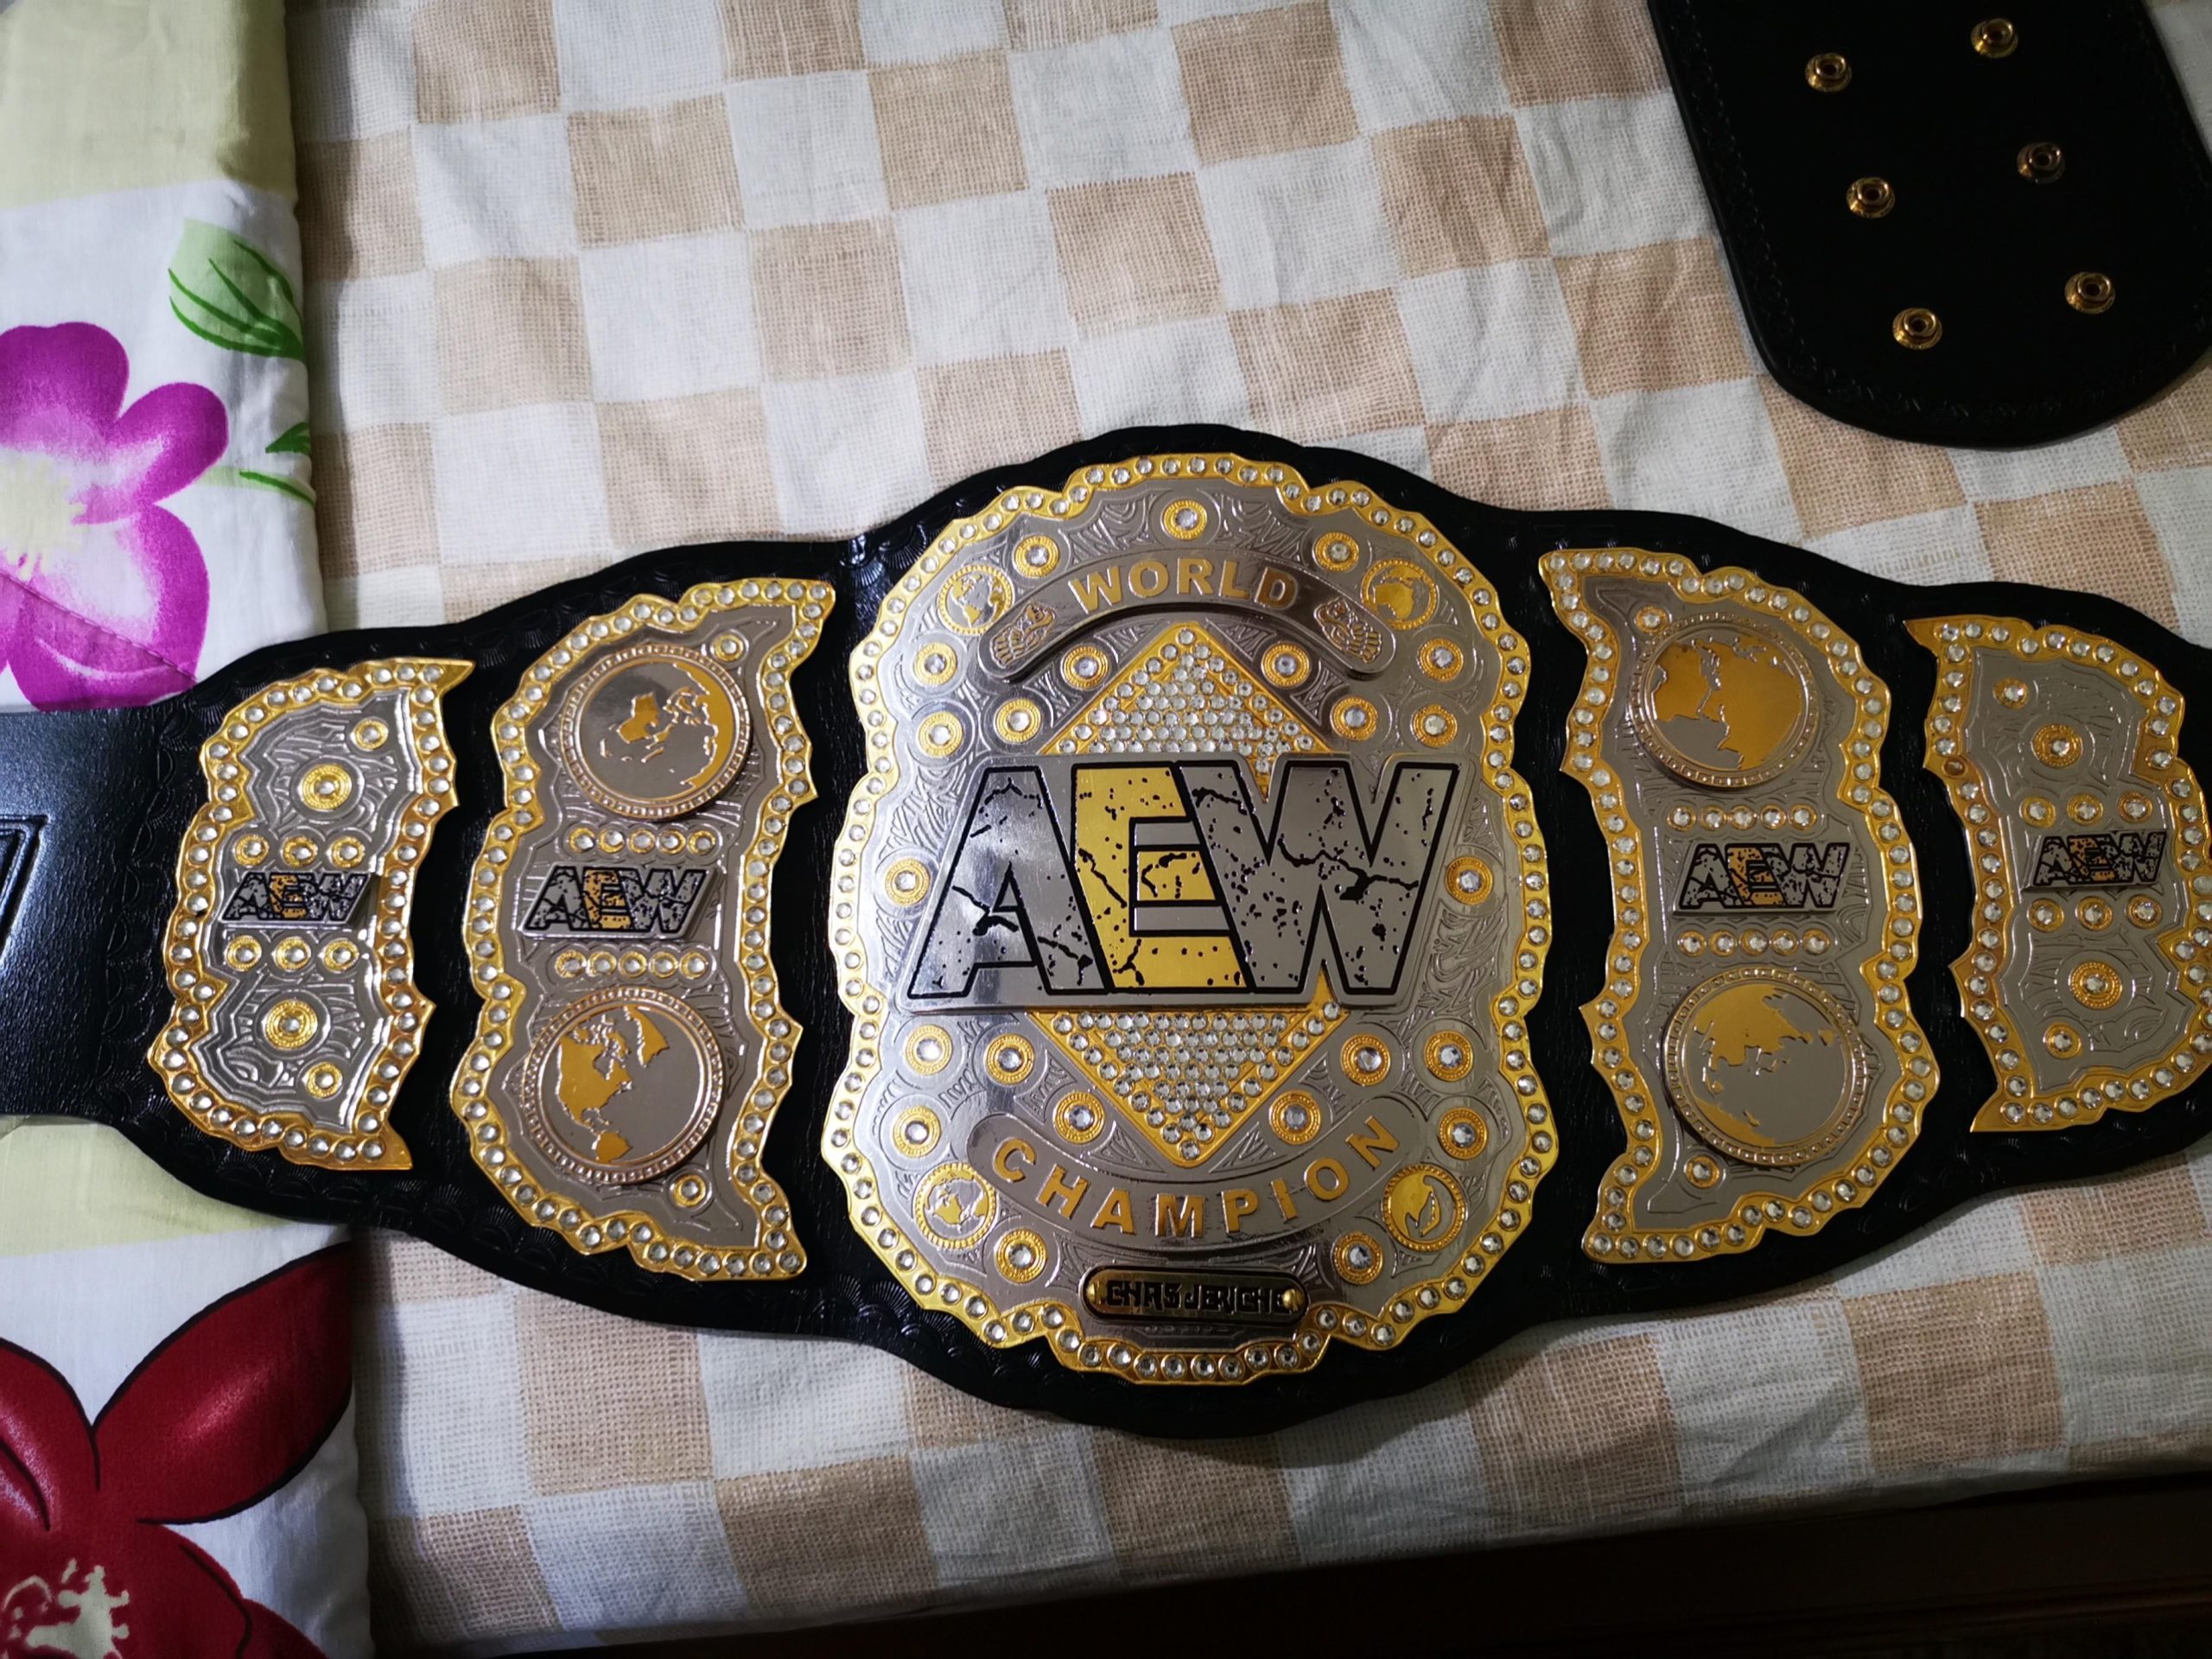 How Much Does It Cost To Make A Wrestling Belt 1 A2c42c55bbde1211a7c5232f6b395e71